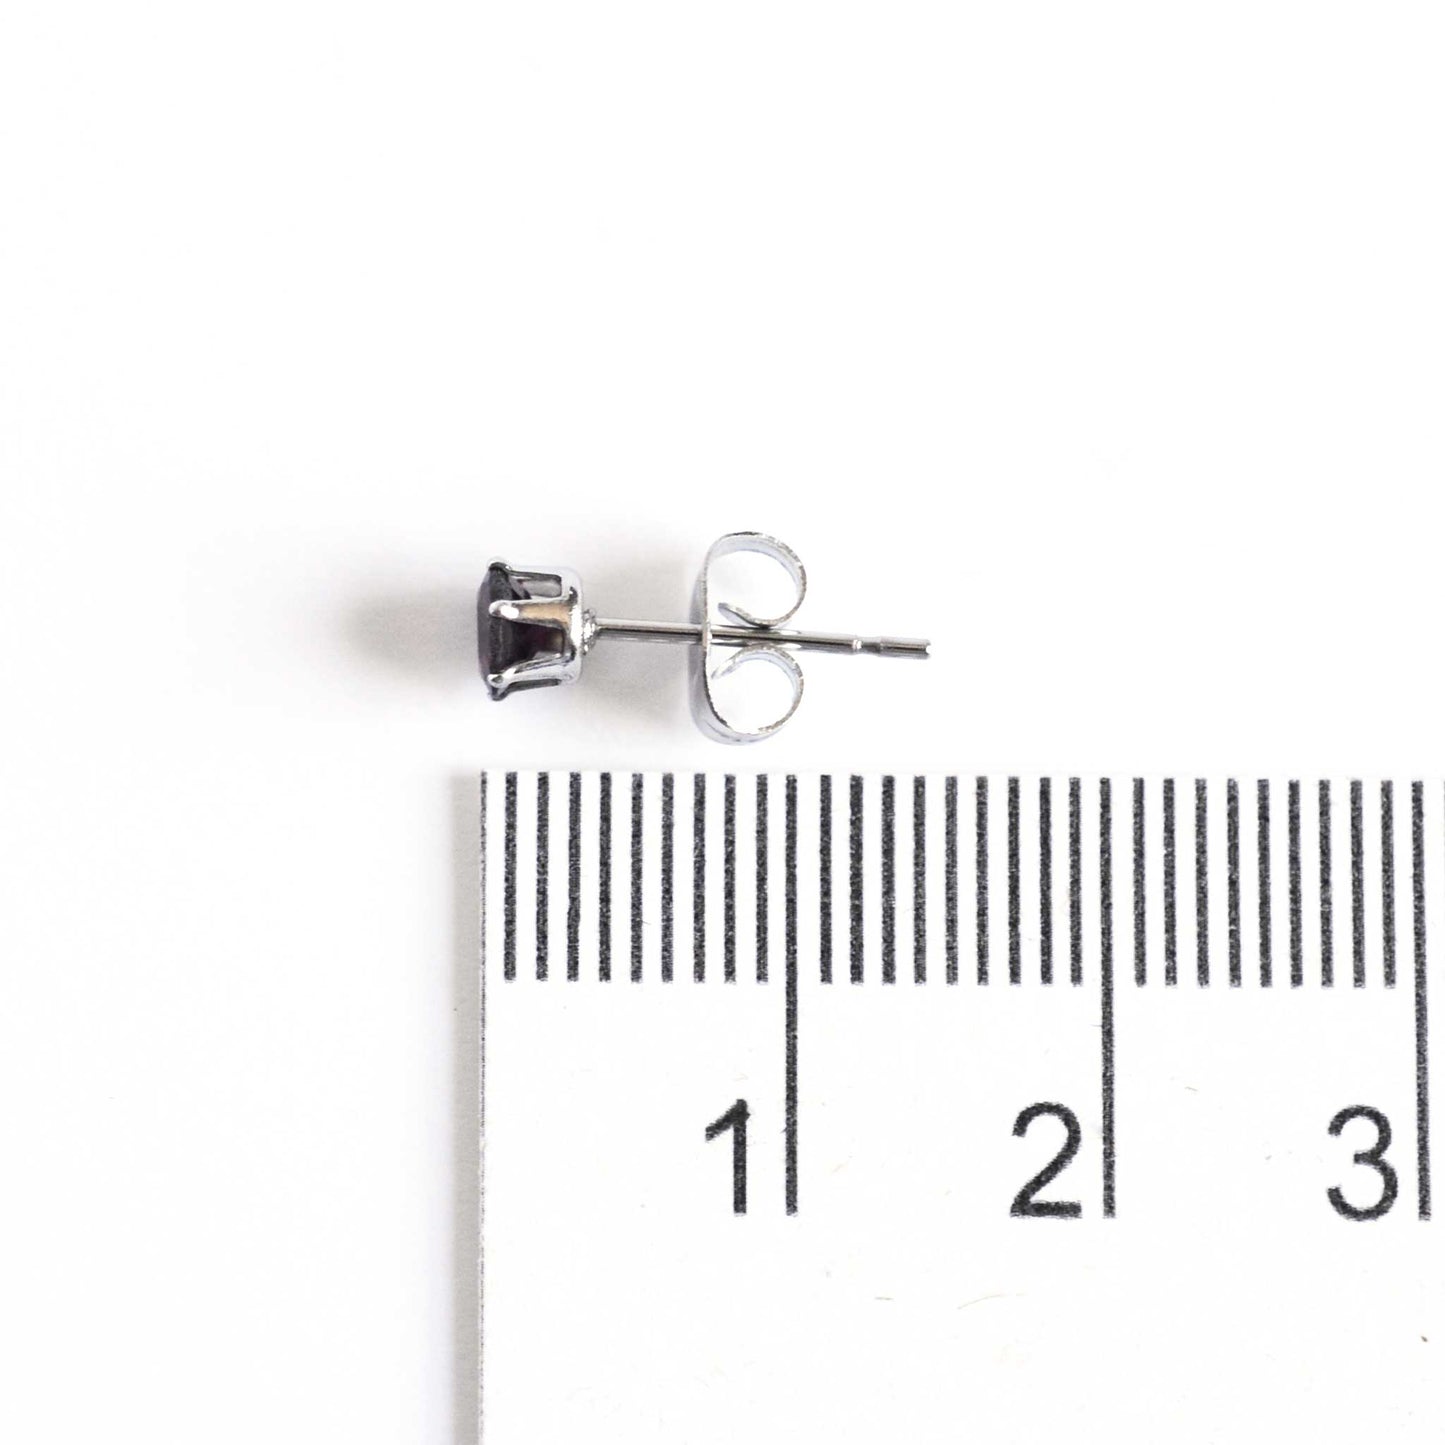 Small gemstone stud earring lying next to ruler measuring 15mm long